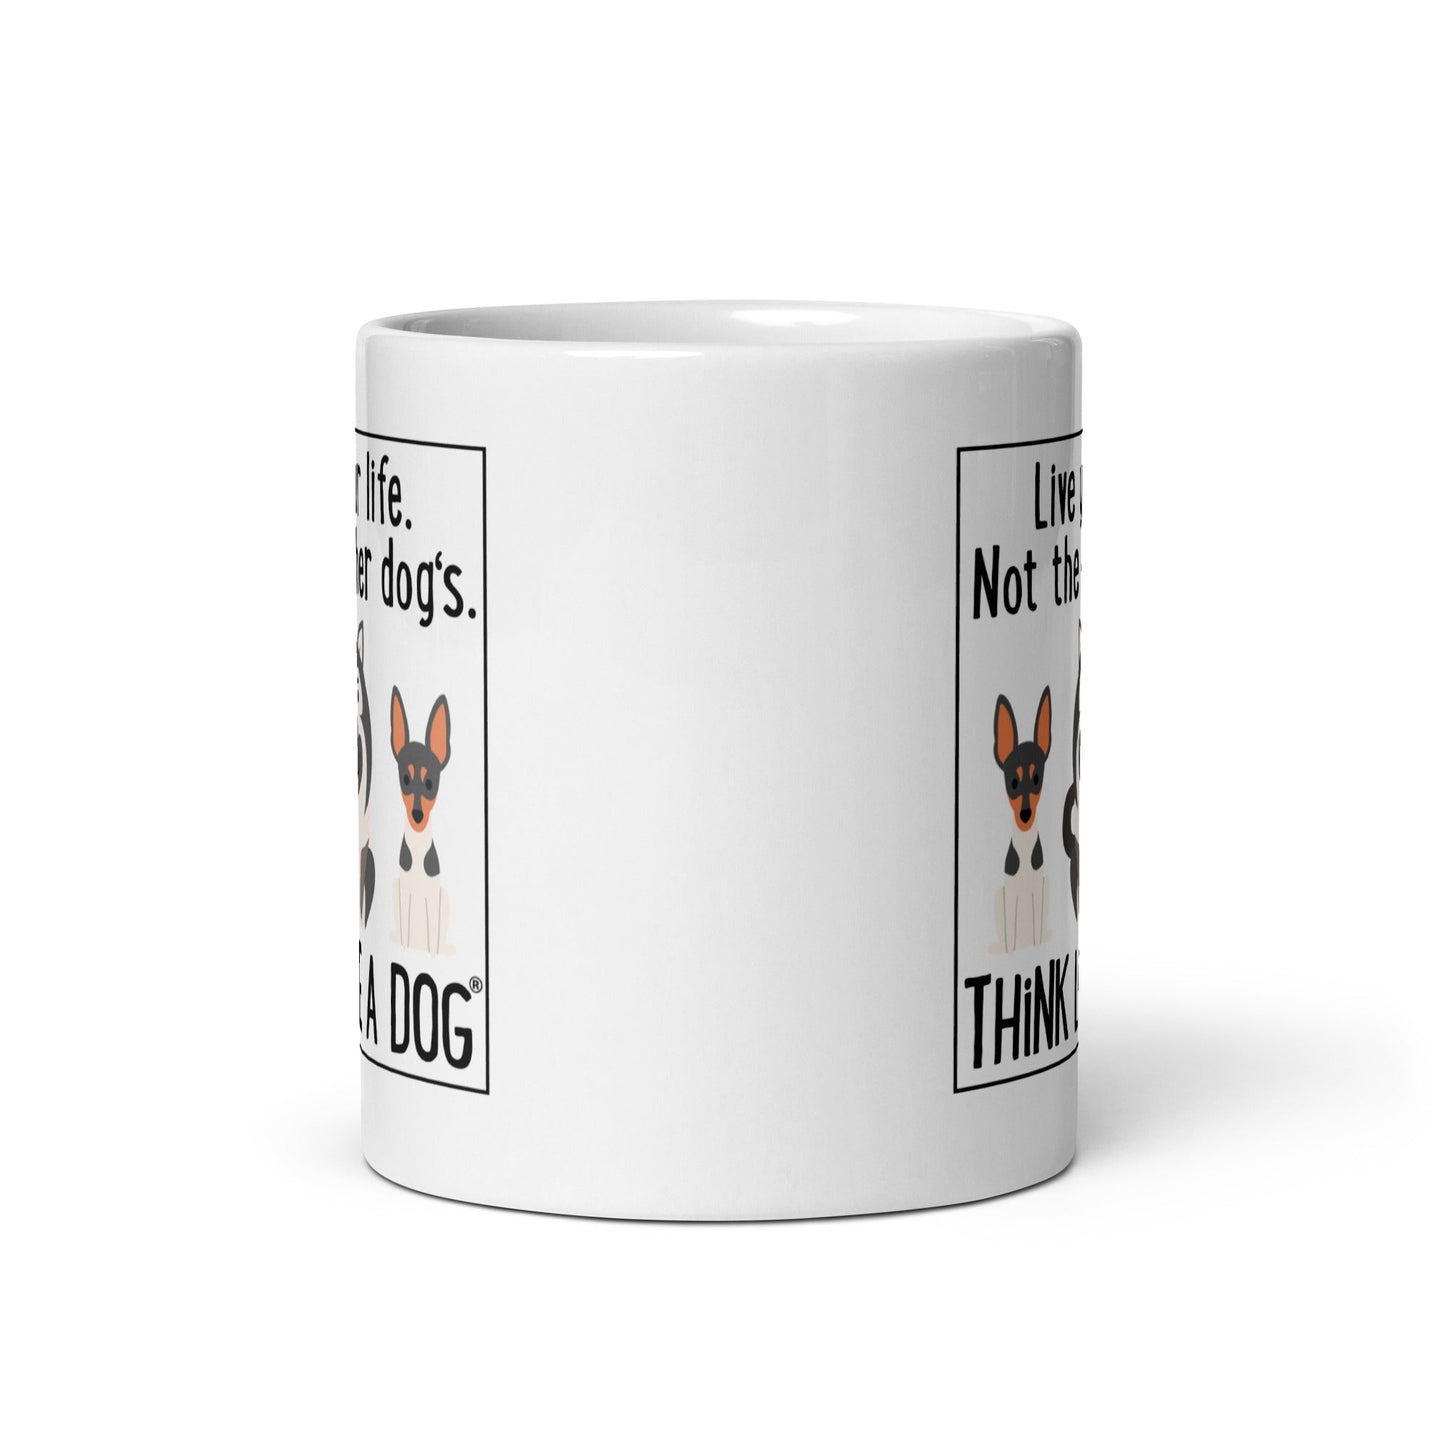 White glossy THiNK LiKE A DOG® coffee mug with text and cartoon dog illustrations, featuring phrases about living life like a dog.